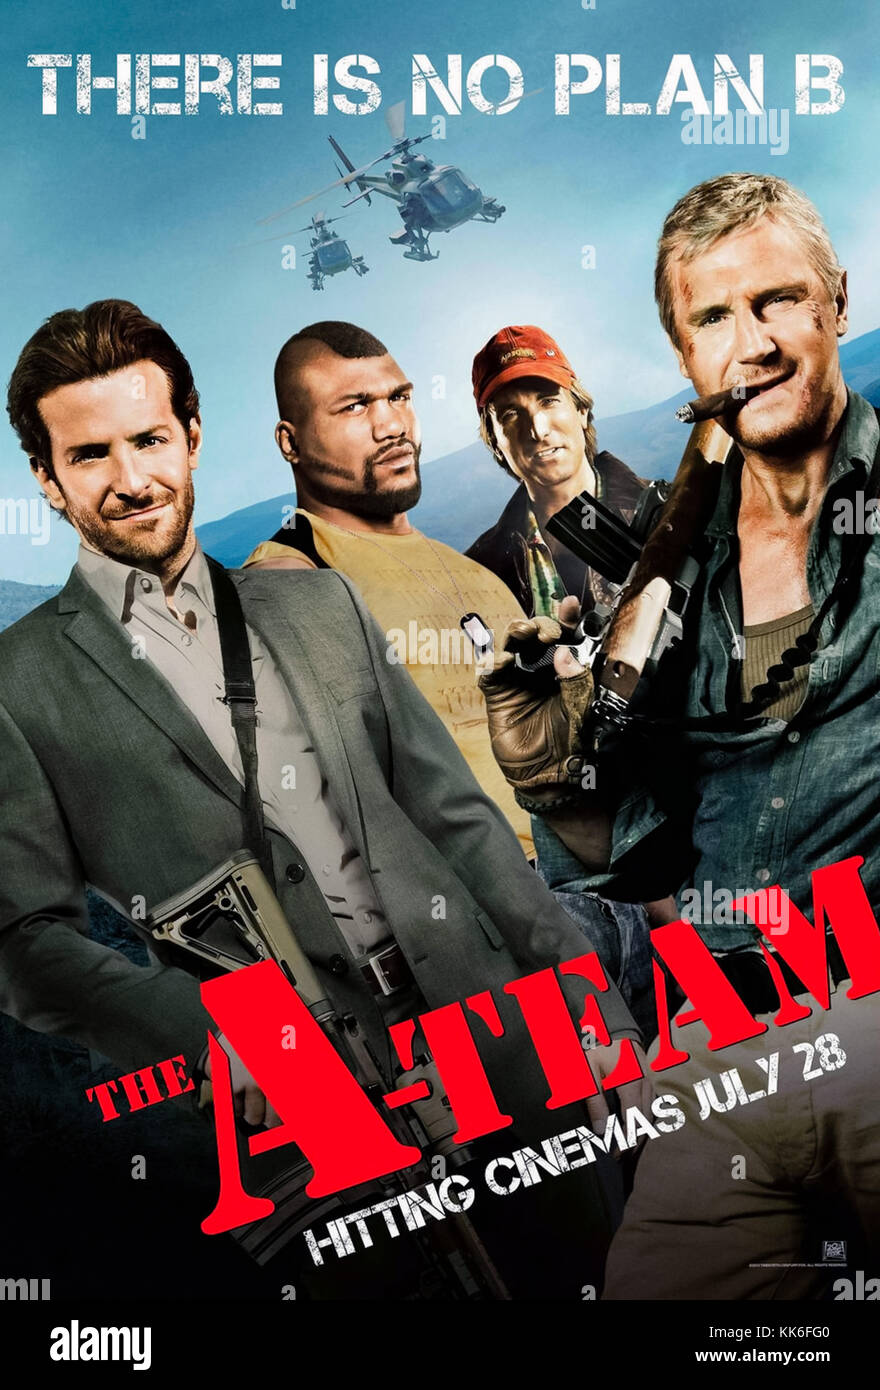 The A-Team (2010) directed by Joe Carnahan and starring Liam Neeson, Bradley Cooper, Sharlto Copley and Quinton 'Rampage' Jackson. Iraq war veterans on the run for a crime they didn’t commit. Stock Photo